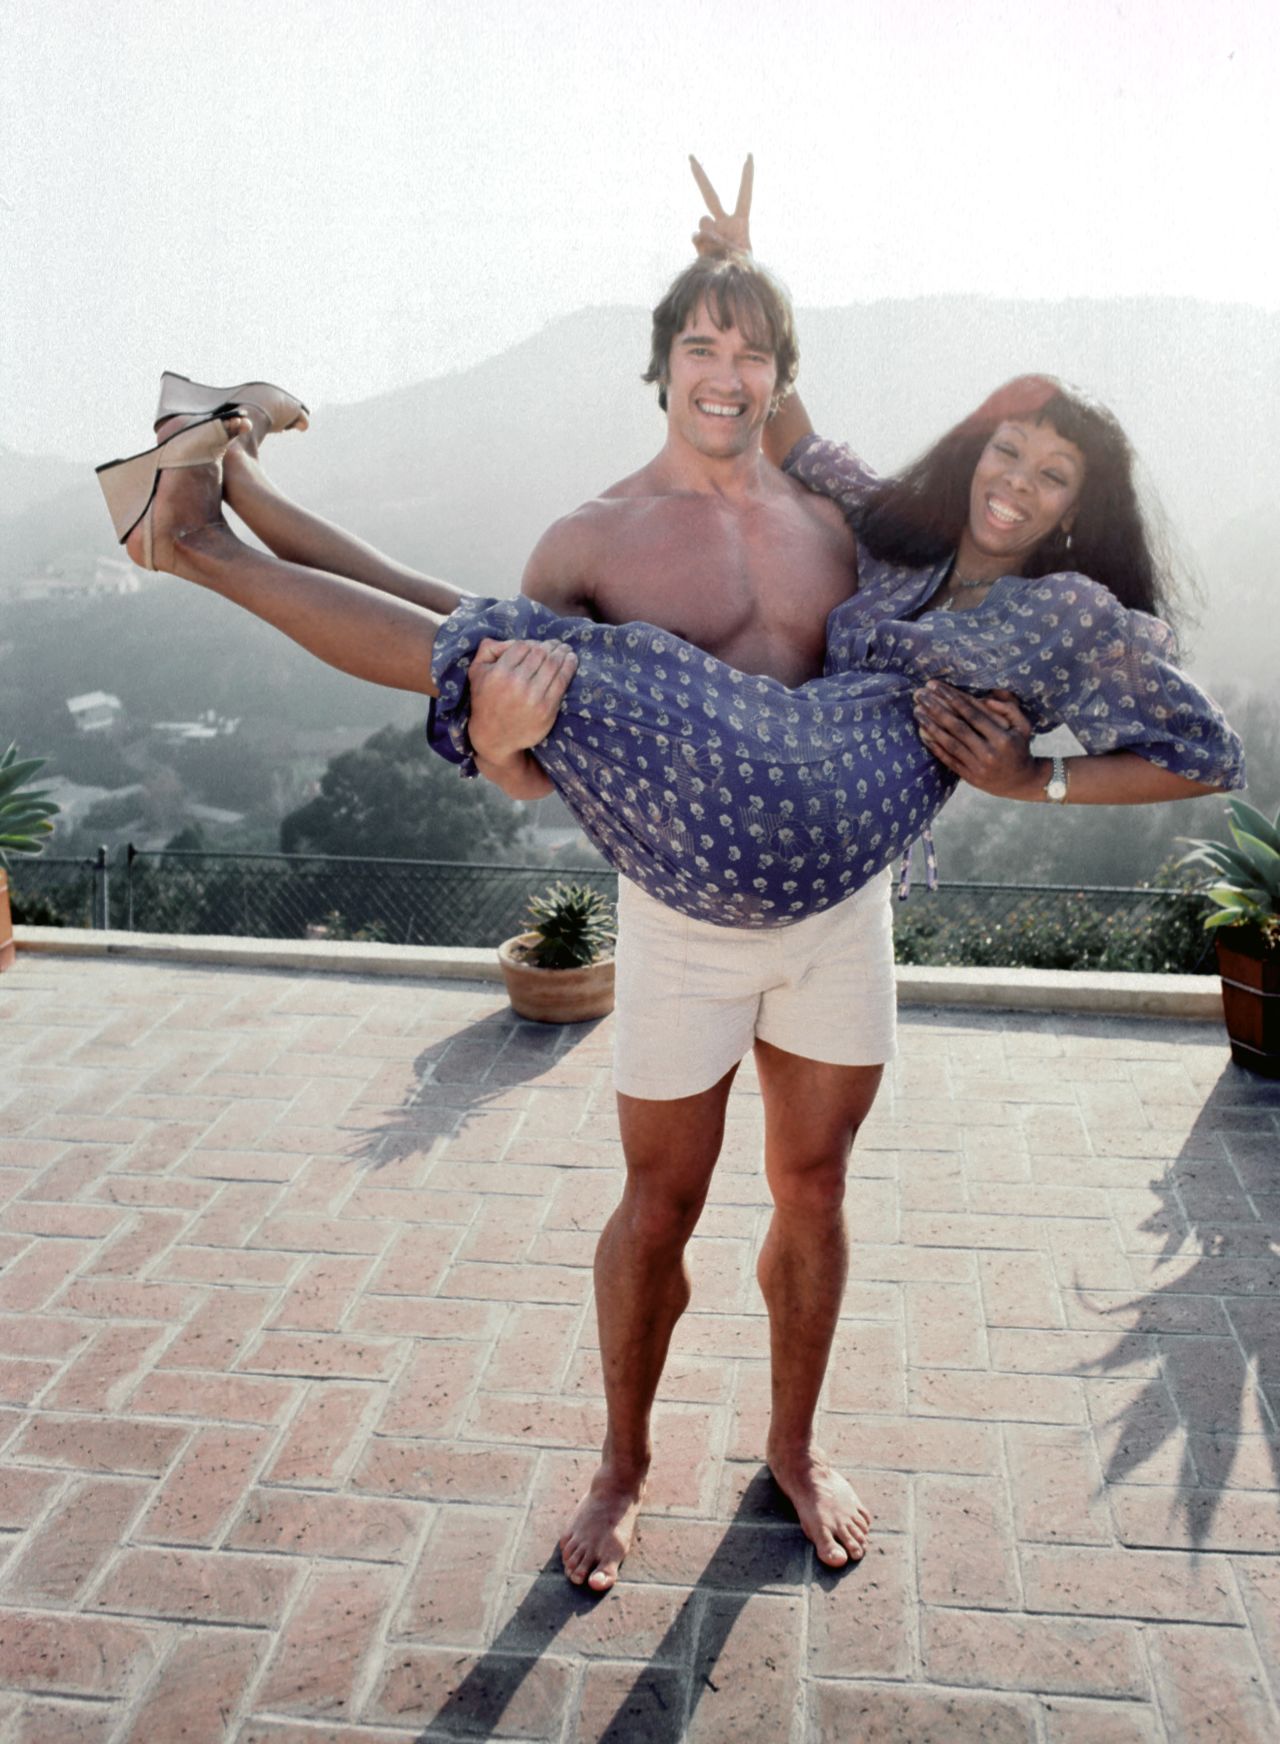 Summer gets a lift from future movie star and politician Arnold Schwarzenegger at her home in Los Angeles in April 1977.